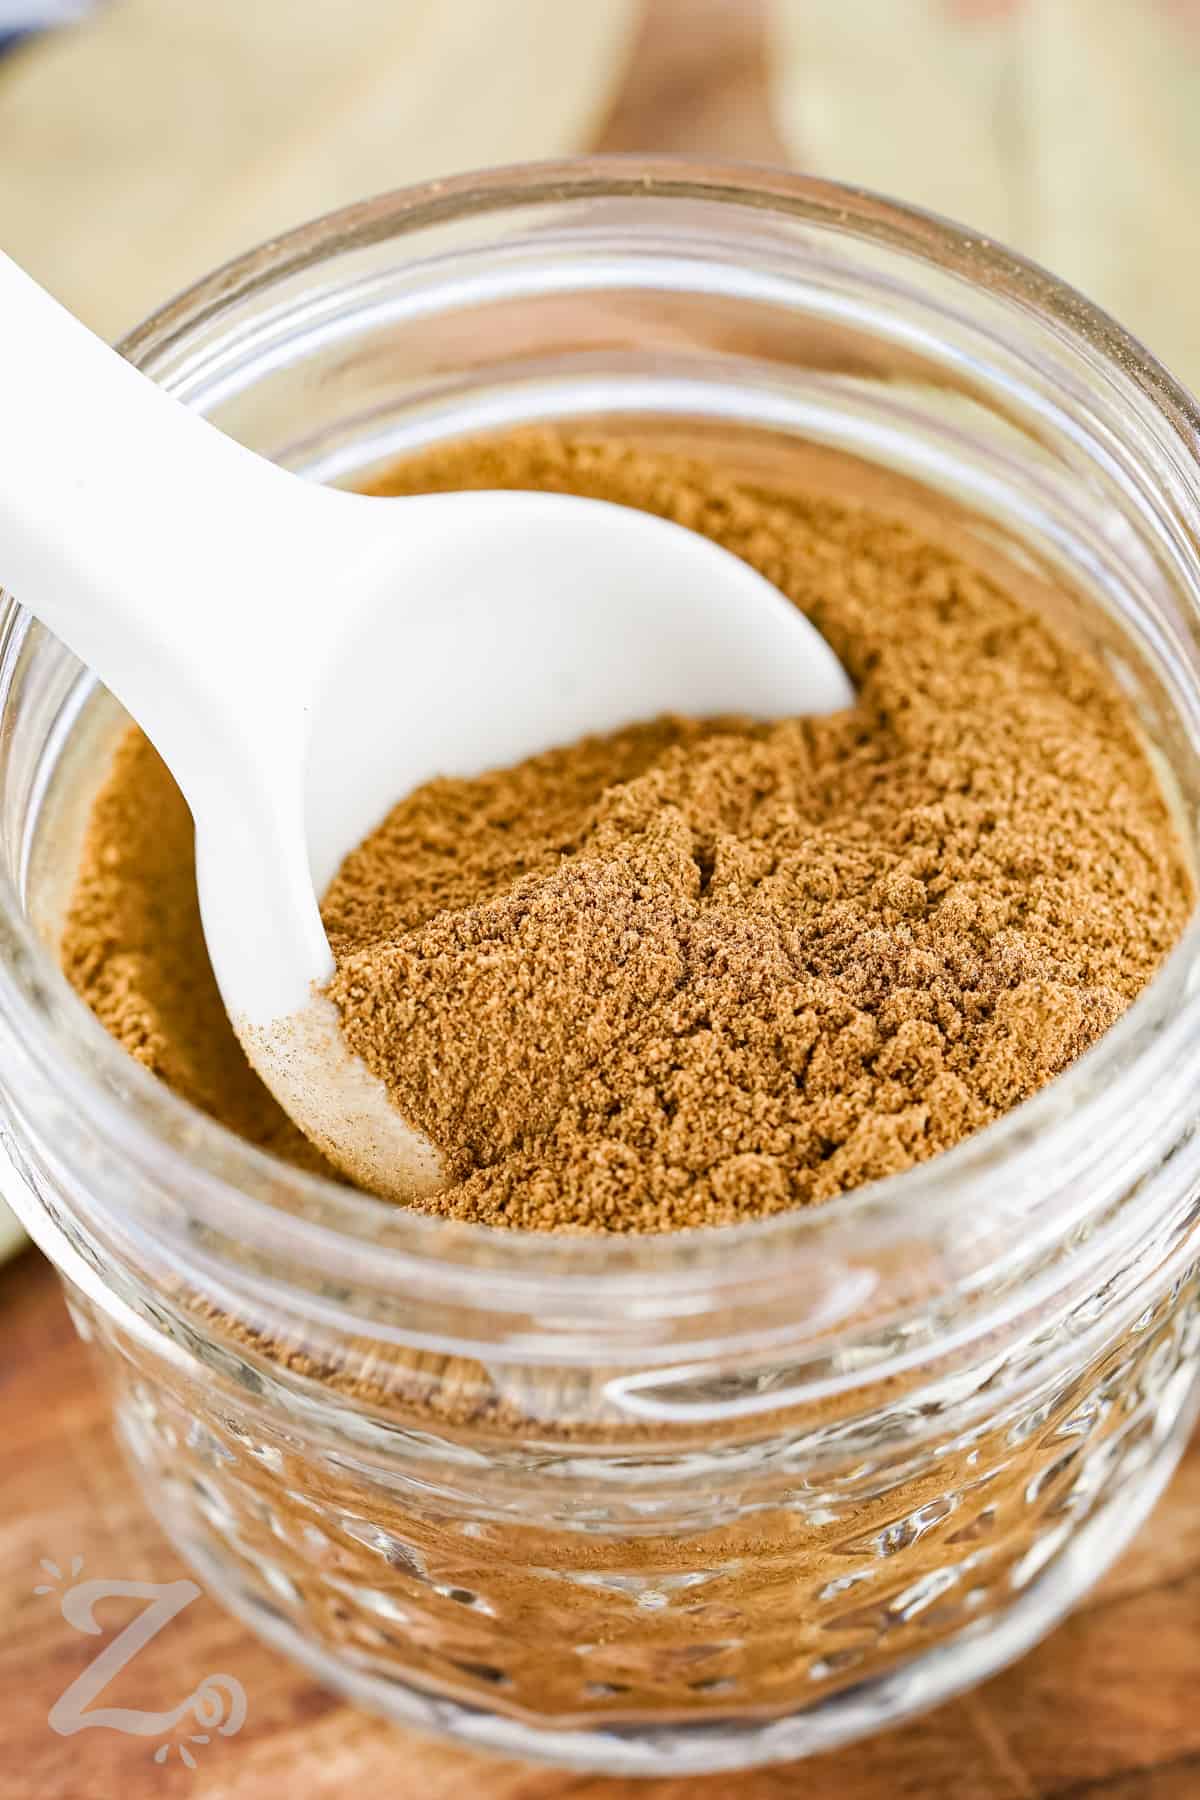 taking a scoop of Apple Pie Spice out of the jar